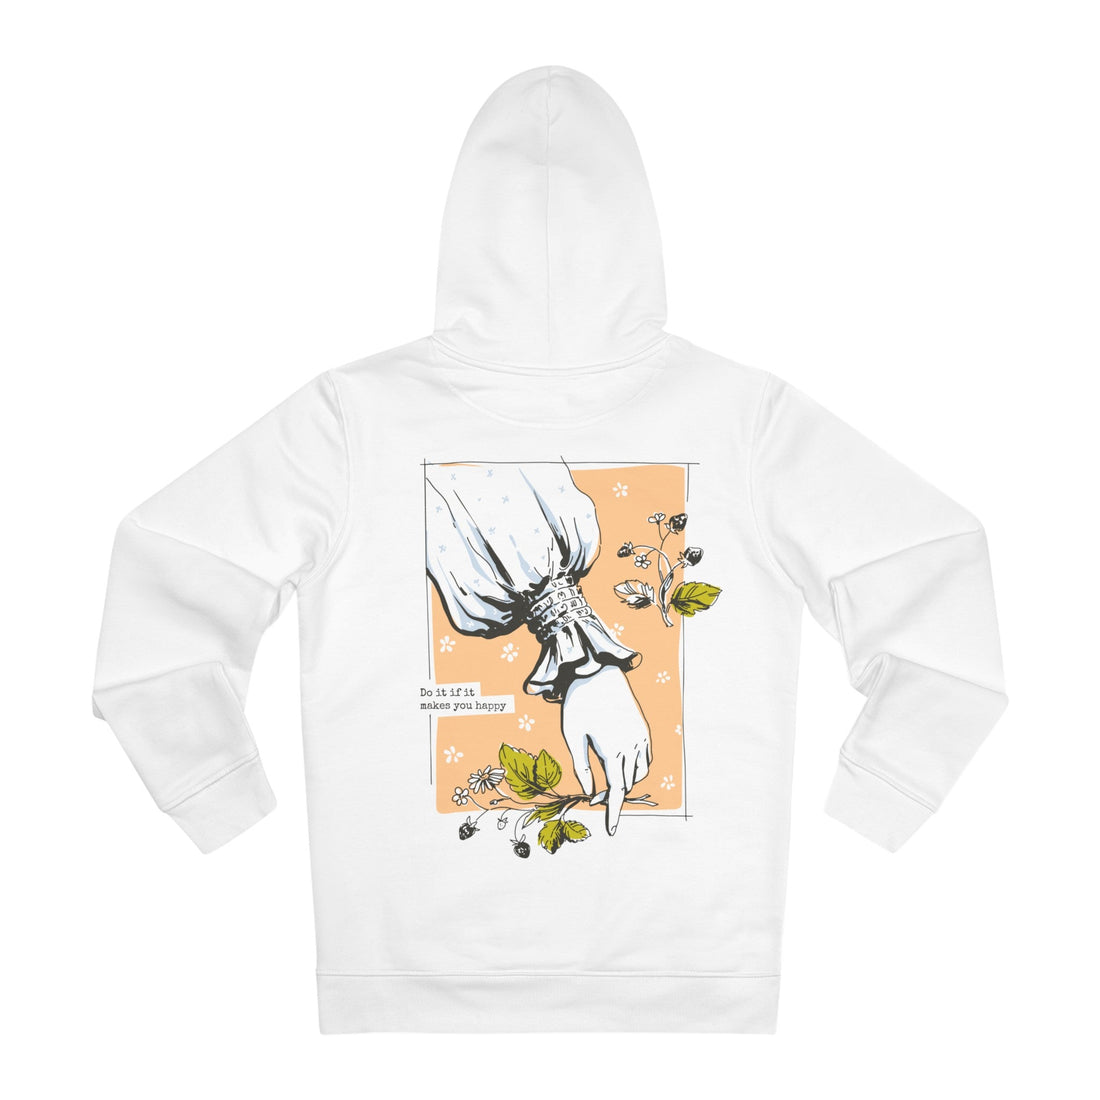 Printify Hoodie White / S Do it if it makes you happy - Cottagecore Lifestyle - Hoodie - Back Design